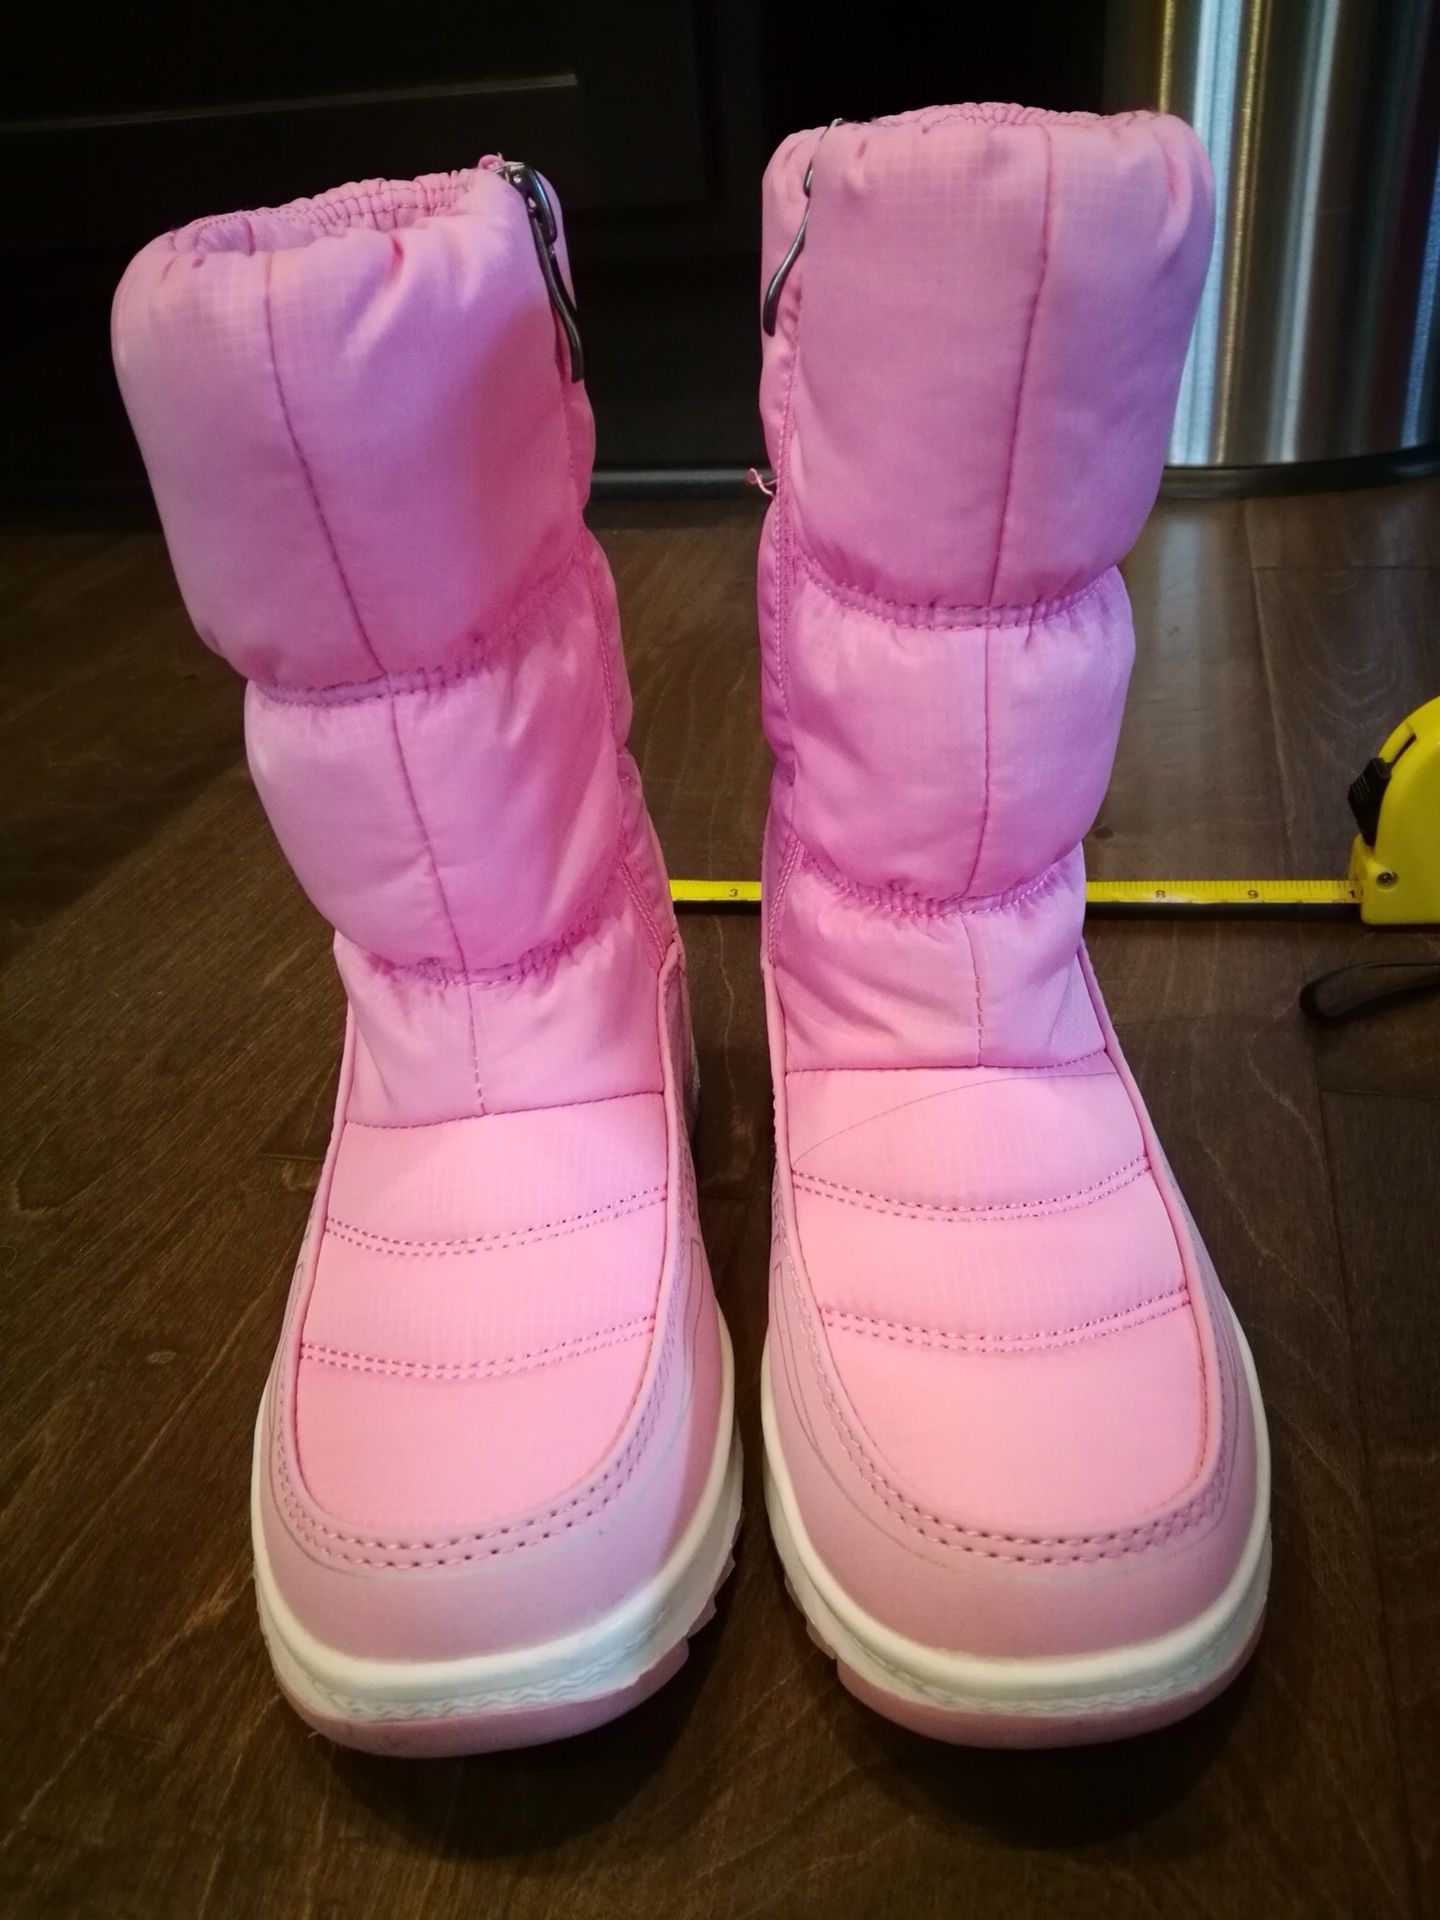 Very pretty girl’s boots, fit 8-10 yrs old